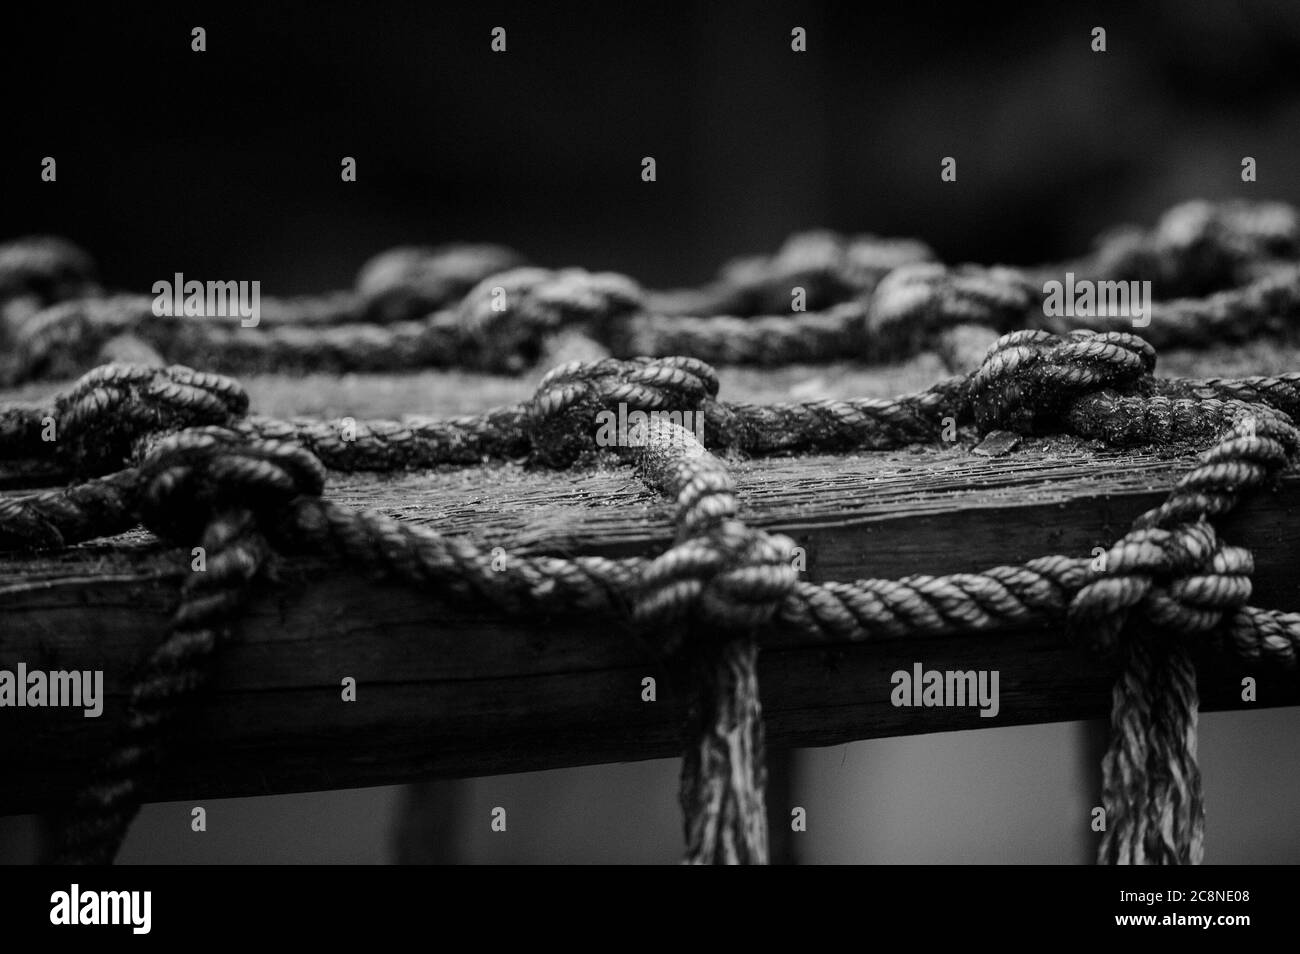 Premium Photo  A close up of a black rope with a dark background